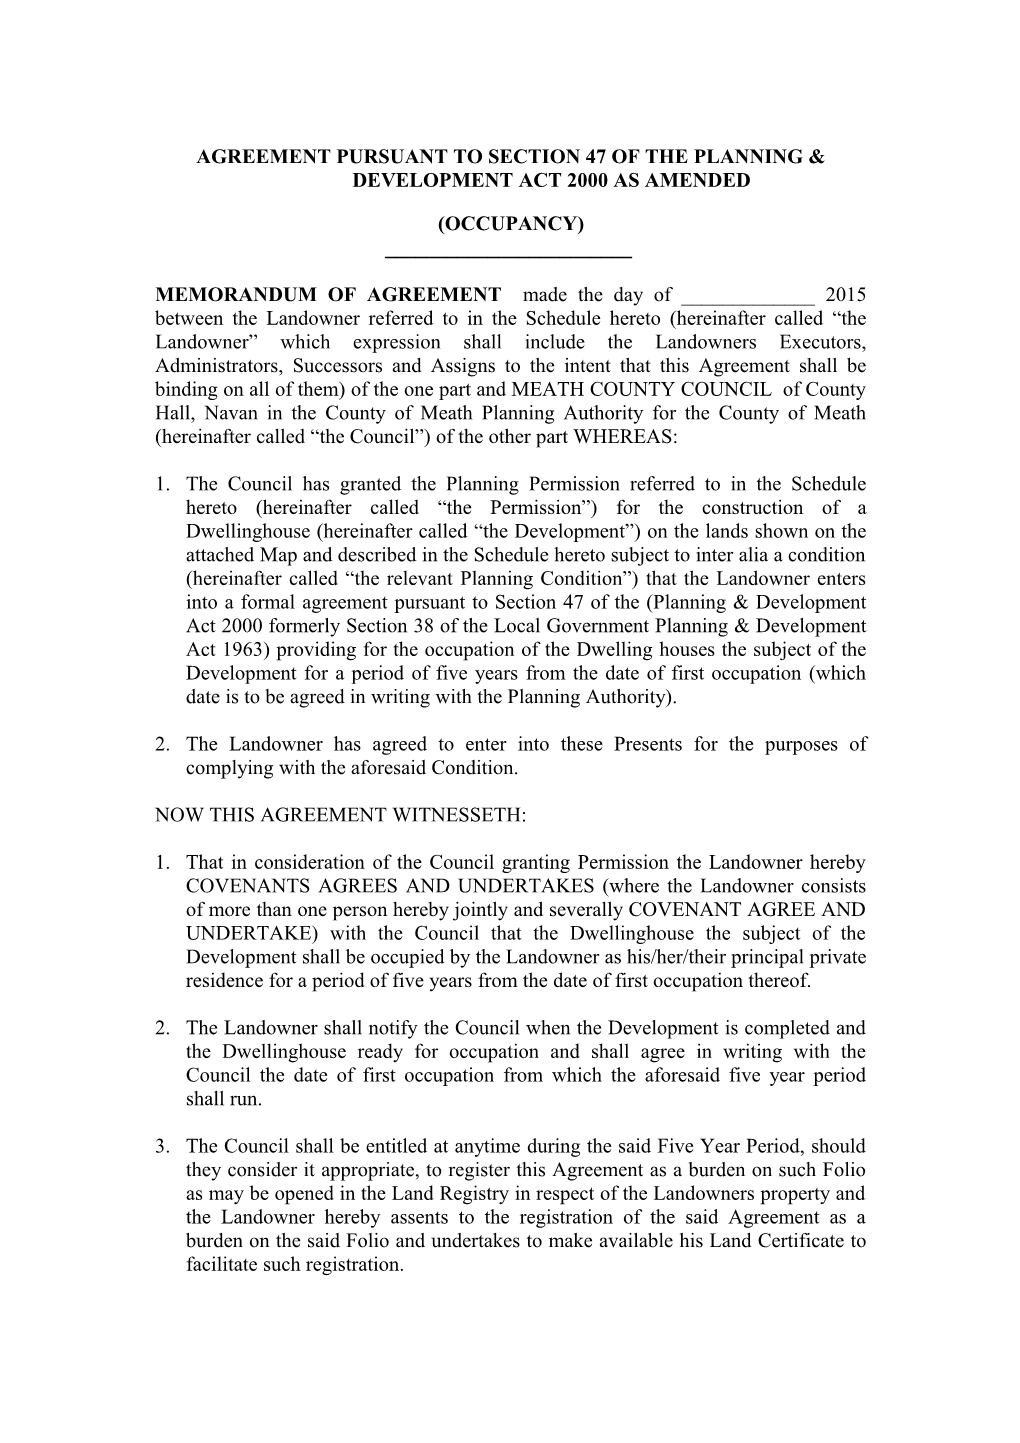 Agreement Pursuant to Section 47 of the Planning & Development Act 2000 As Amended